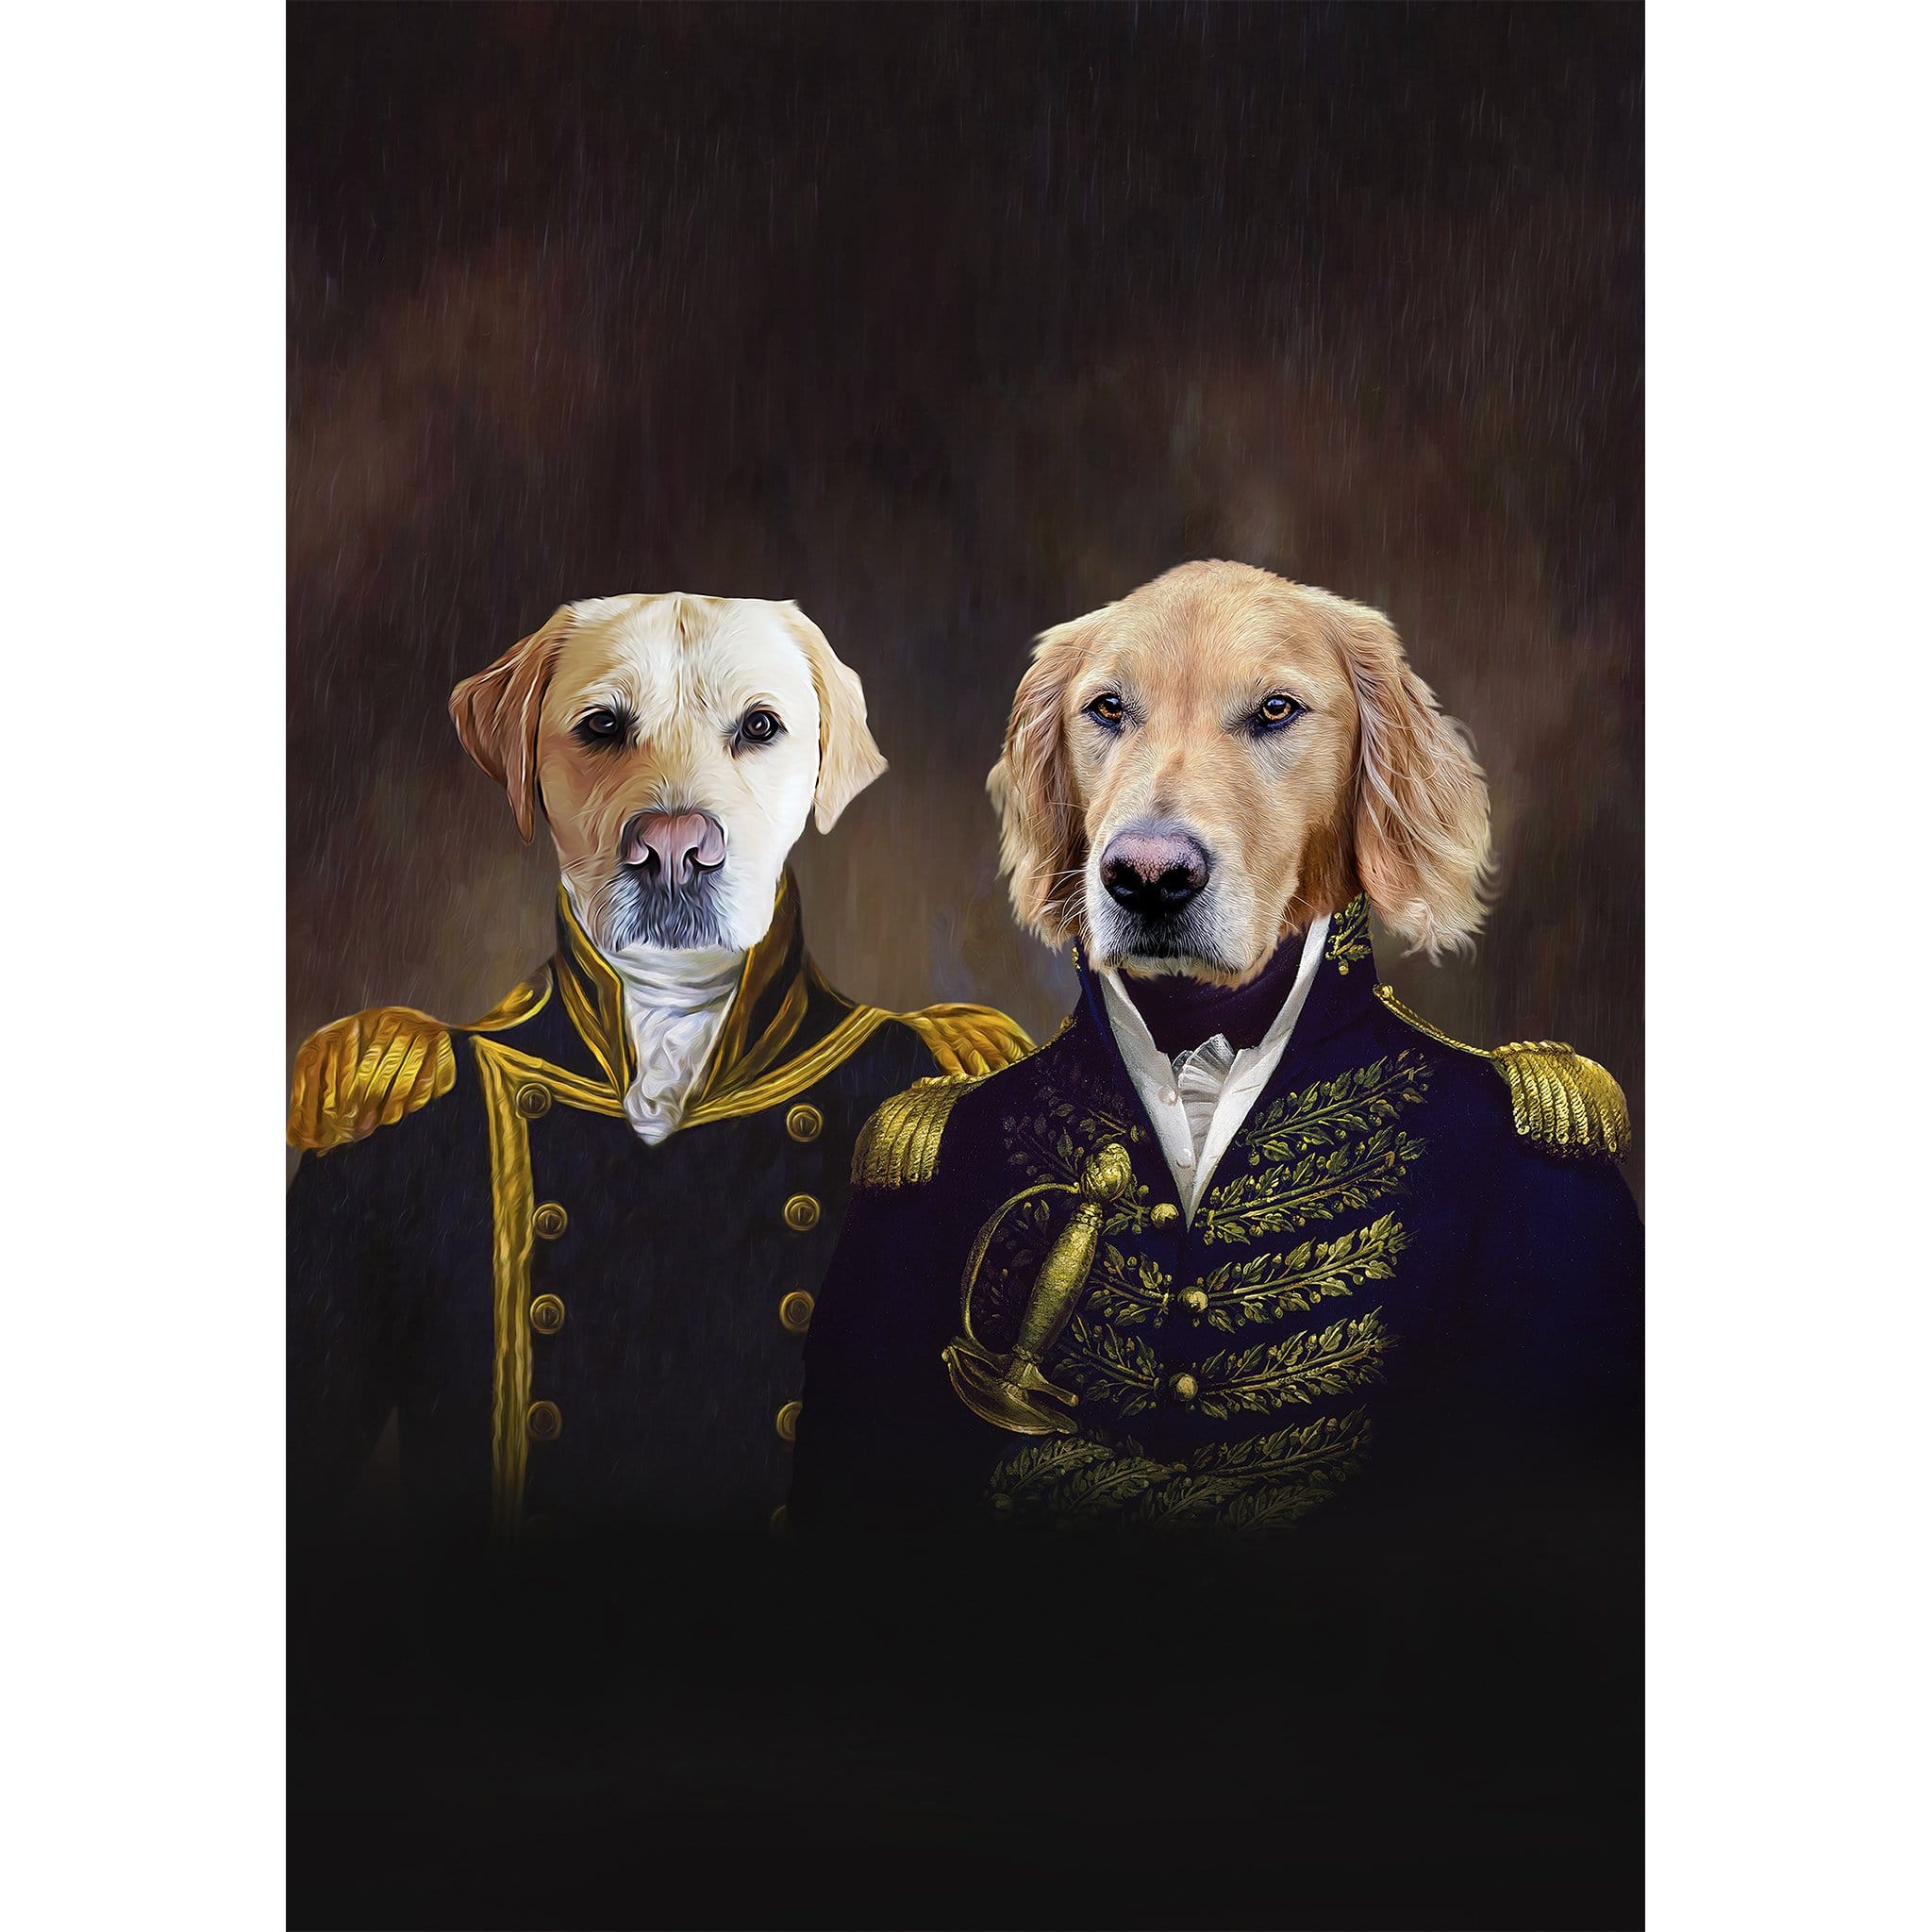 &#39;The Admiral and the Captain&#39; 2 Pet Digital Portrait